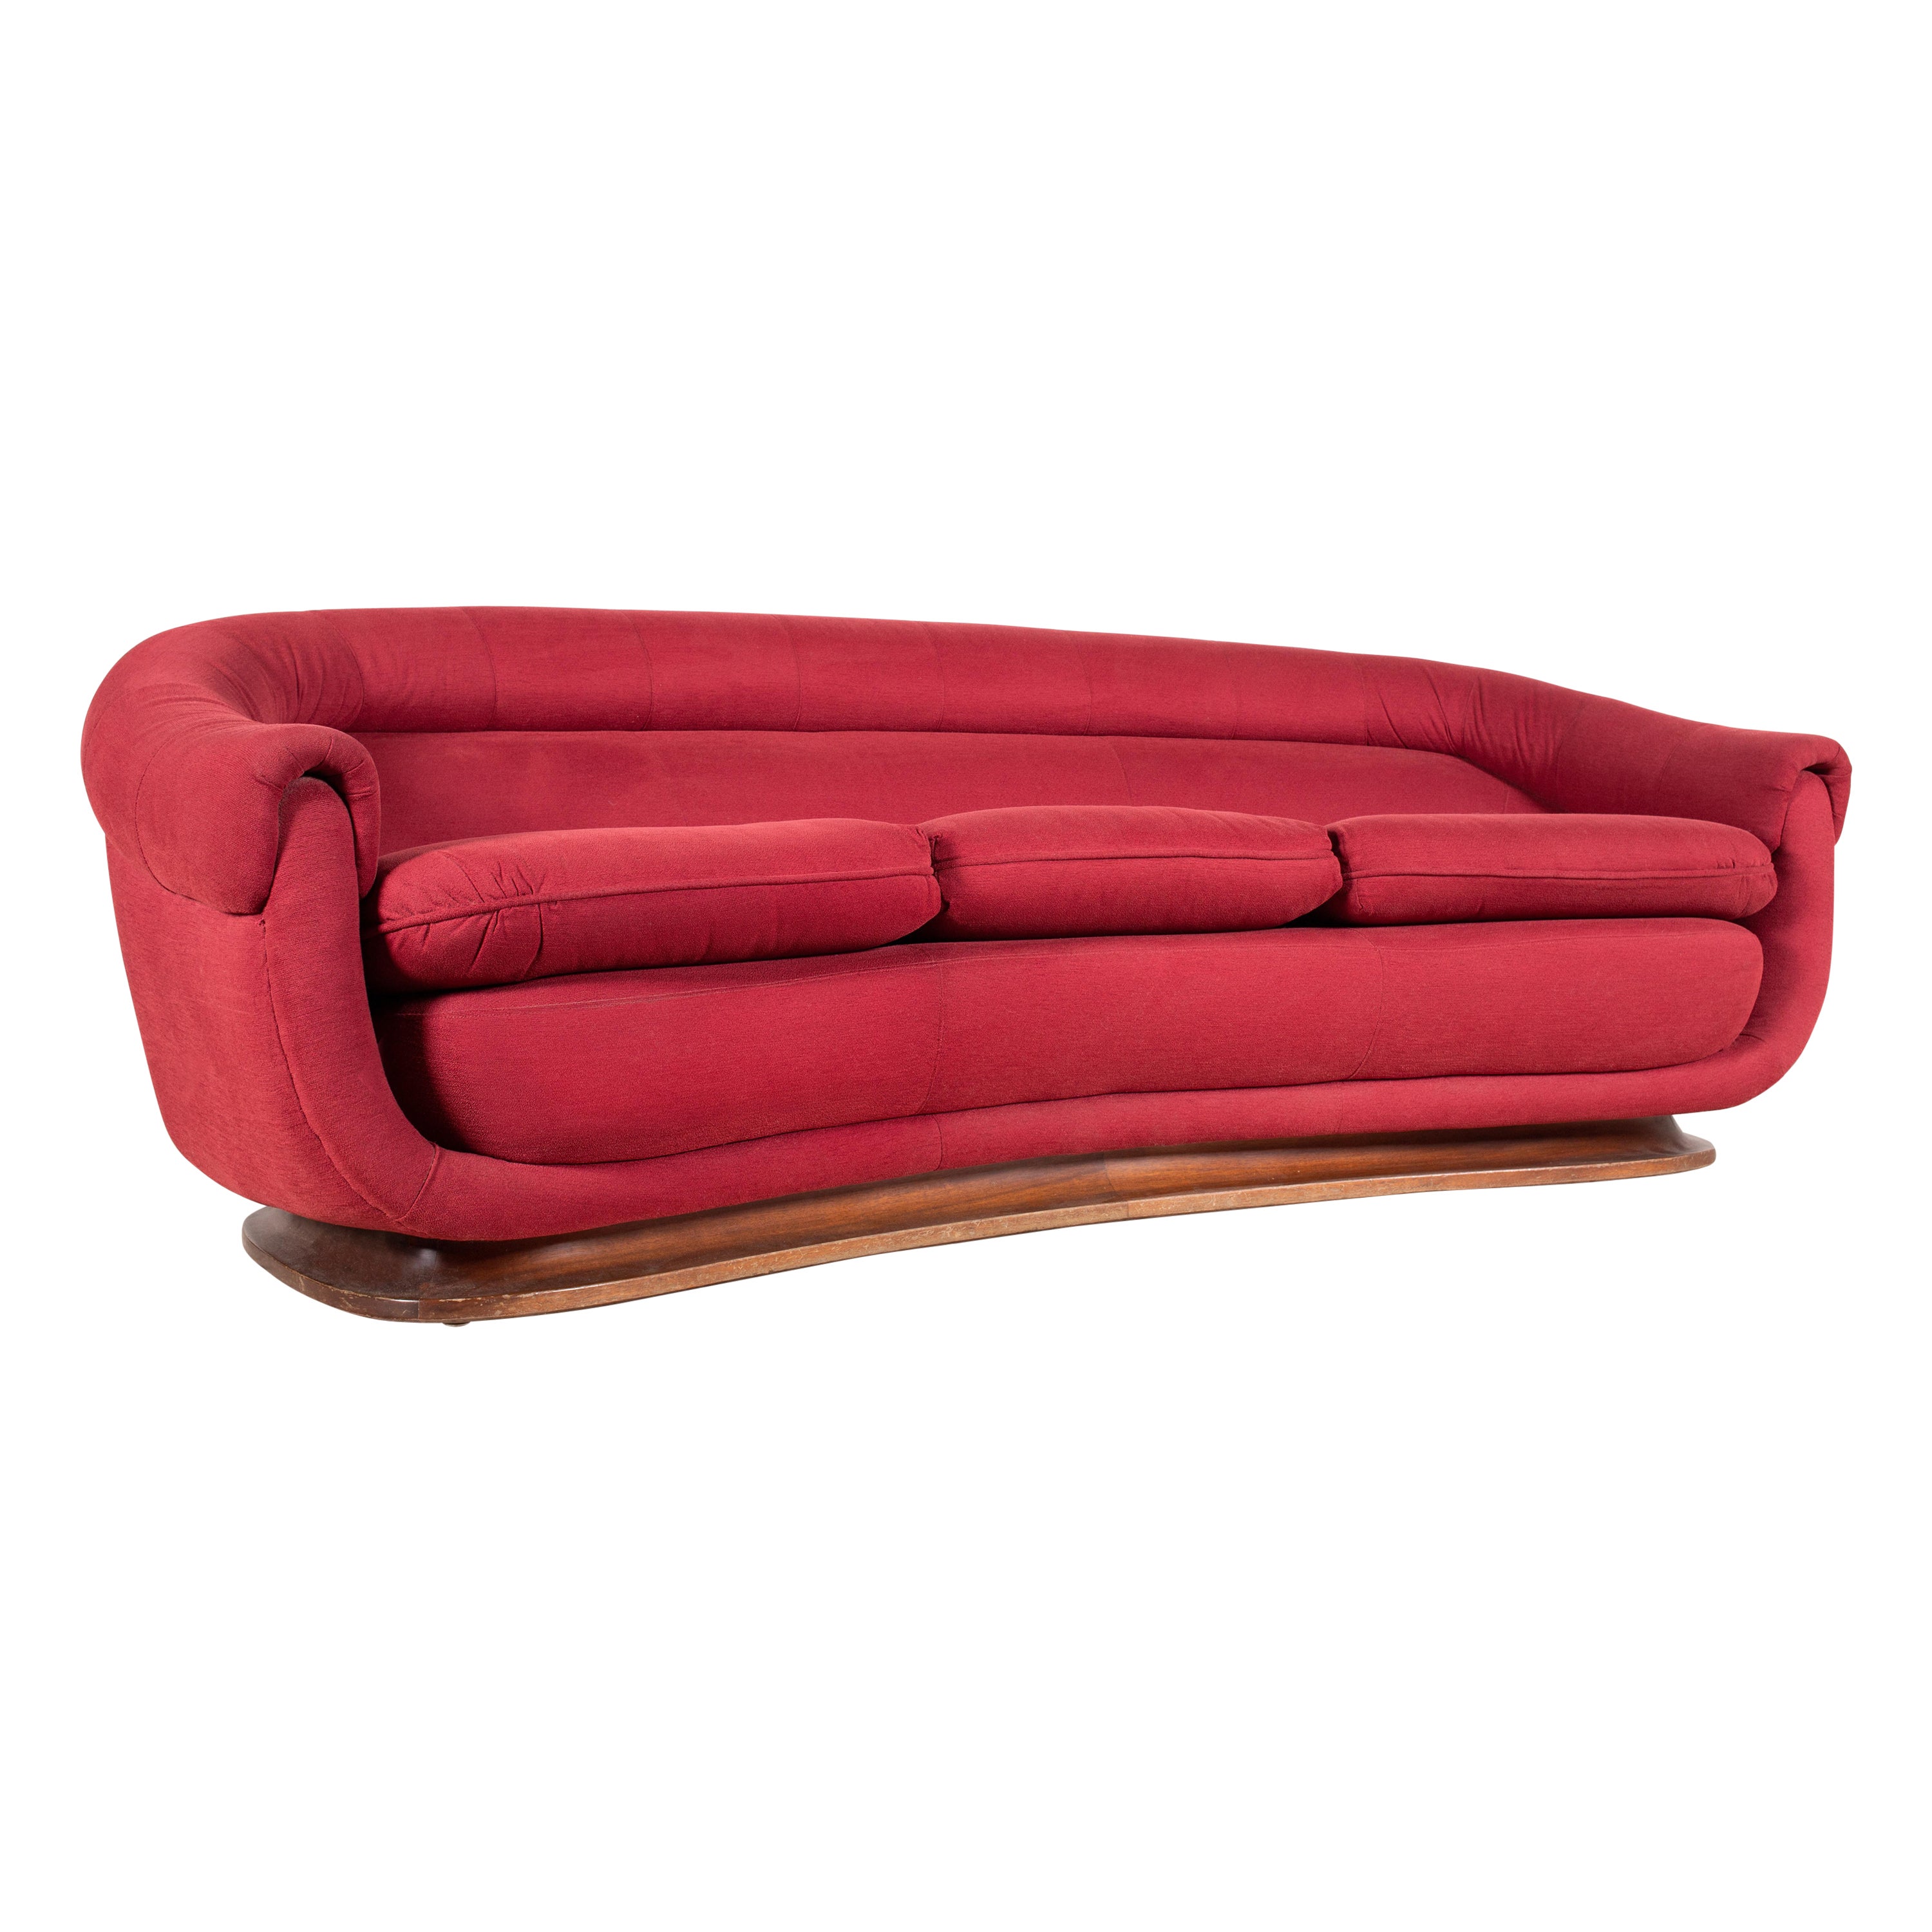 The Moderns Modernity Italian Curved / Crescent 3-Seat Sofa in Red Fabric & Walnut des années 1950 en vente